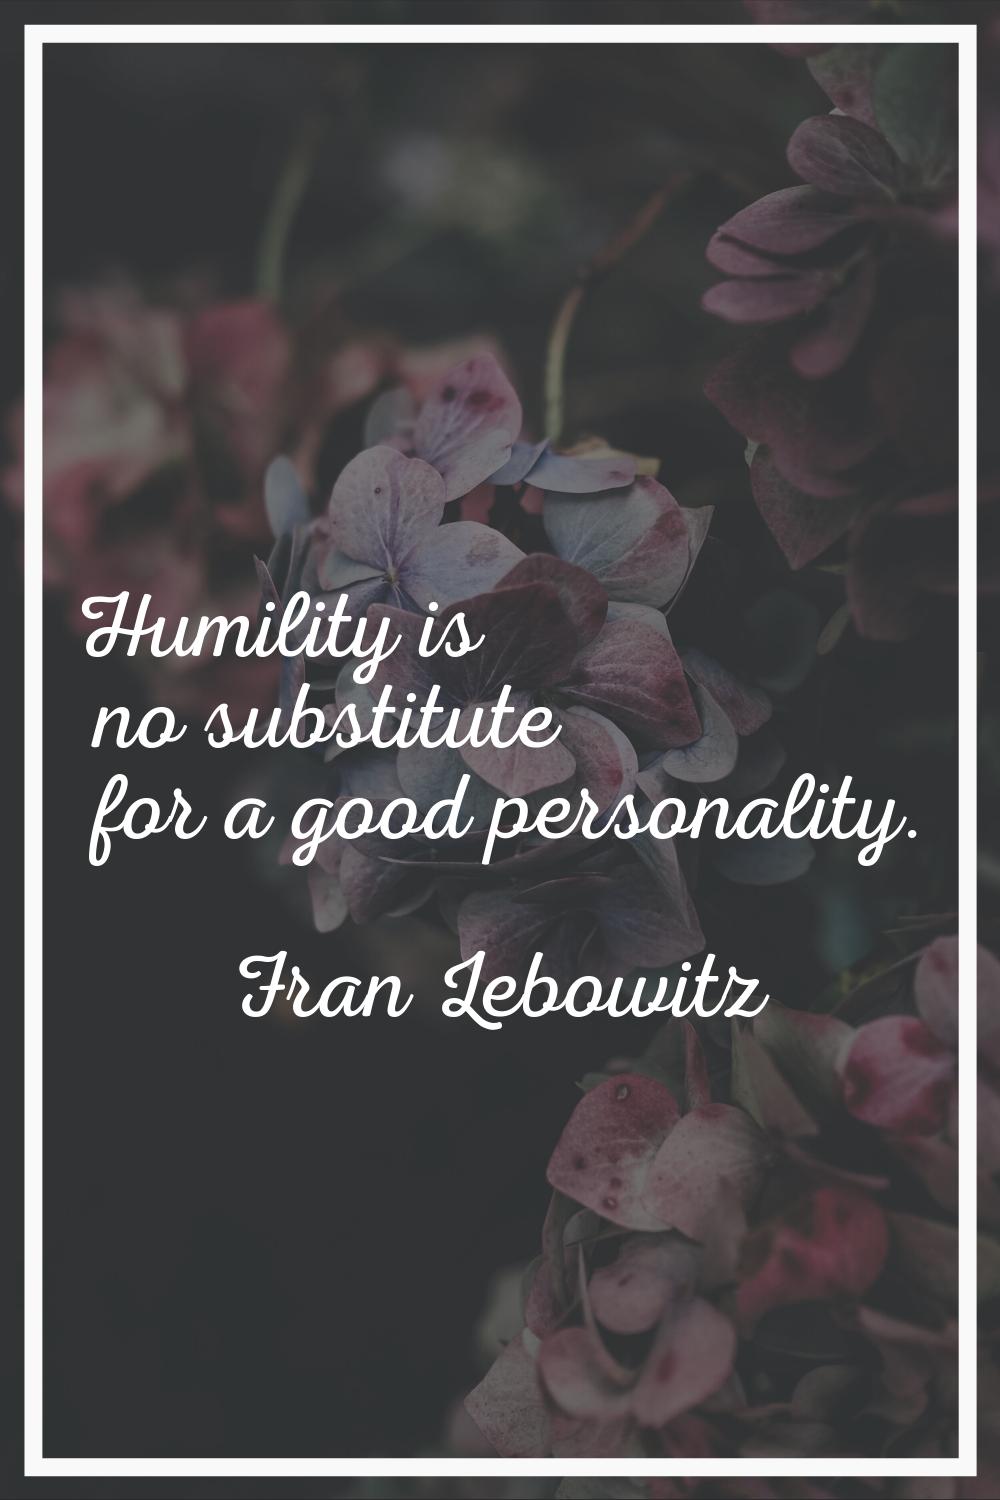 Humility is no substitute for a good personality.